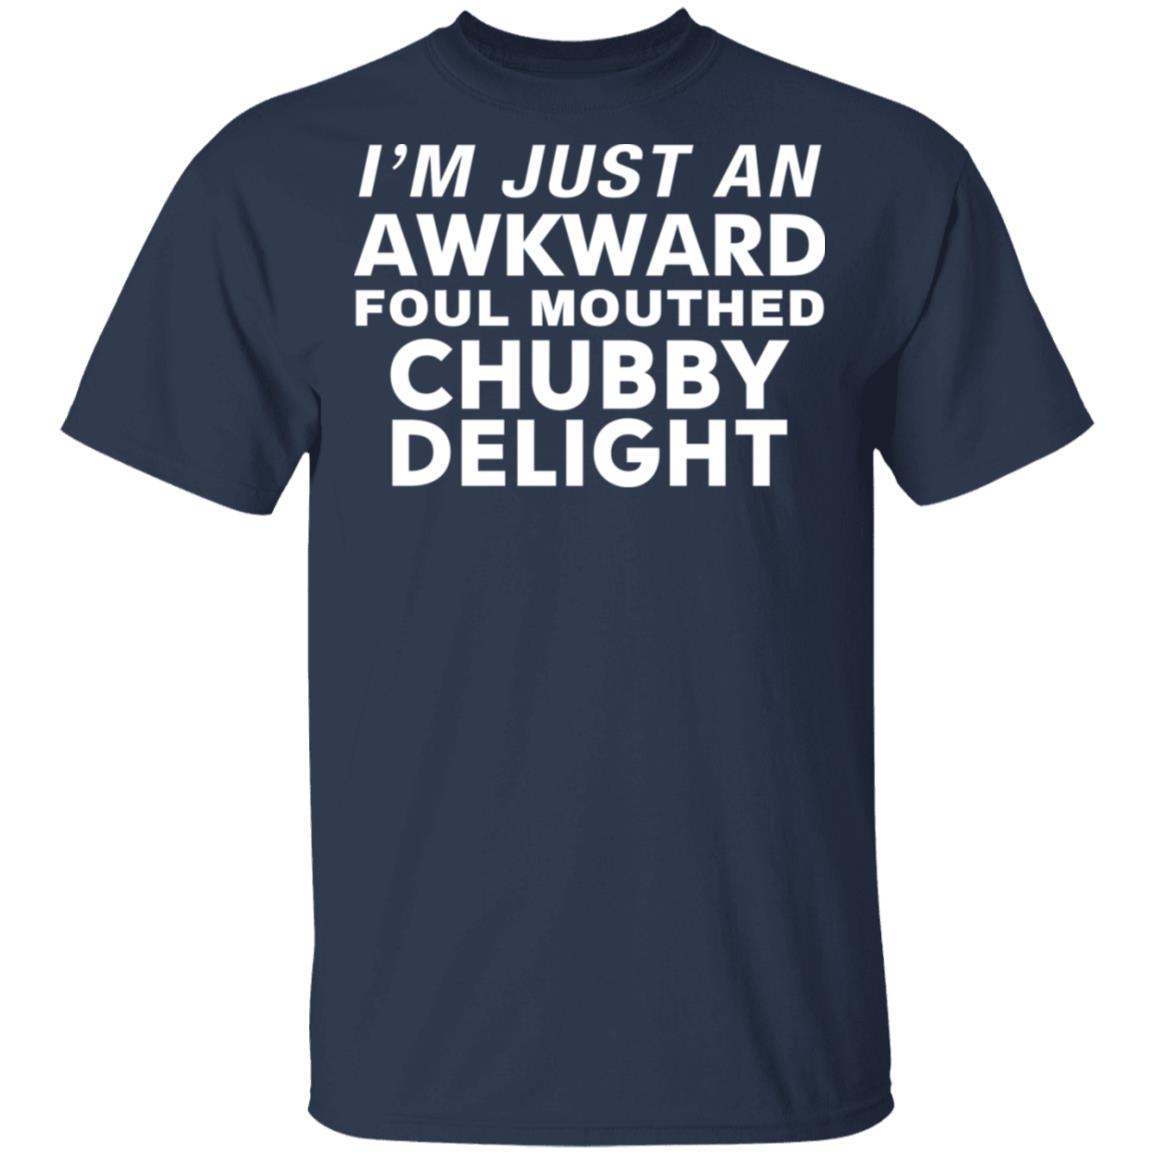 I'm just an awkward foul mouthed Chubby delight shirt - Rockatee